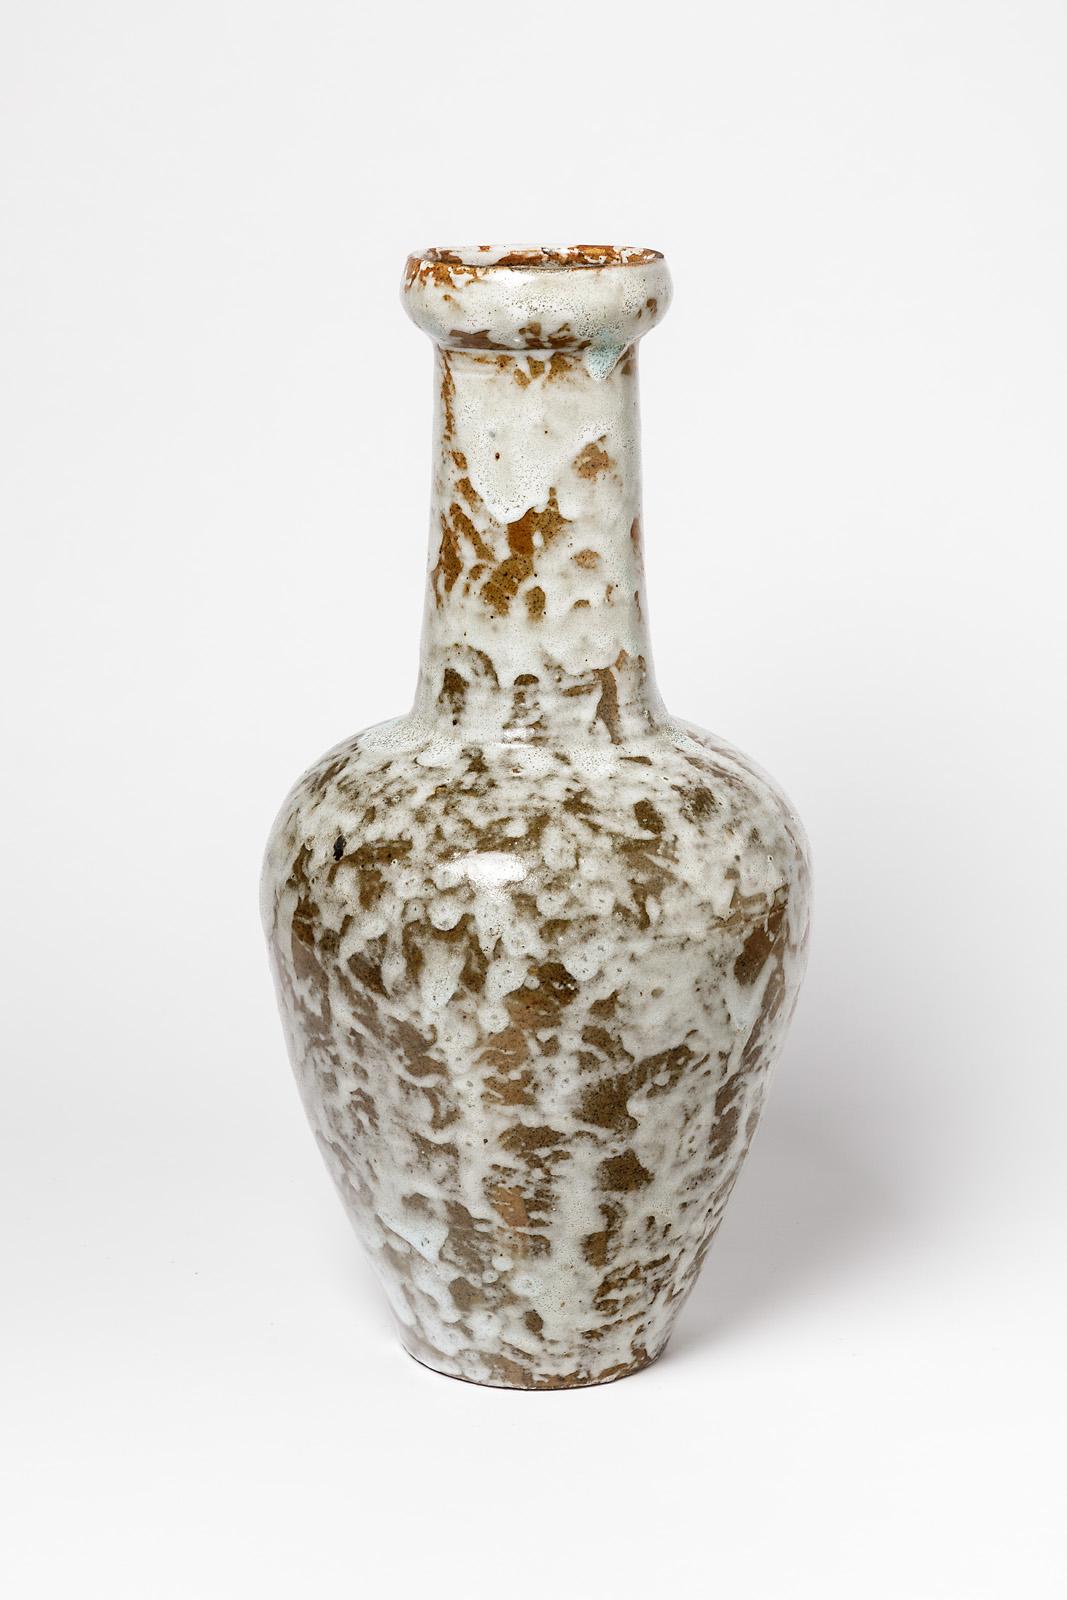 French Ceramic Vase with White Glaze Decoration, Signed Lion, circa 1920-1930 For Sale